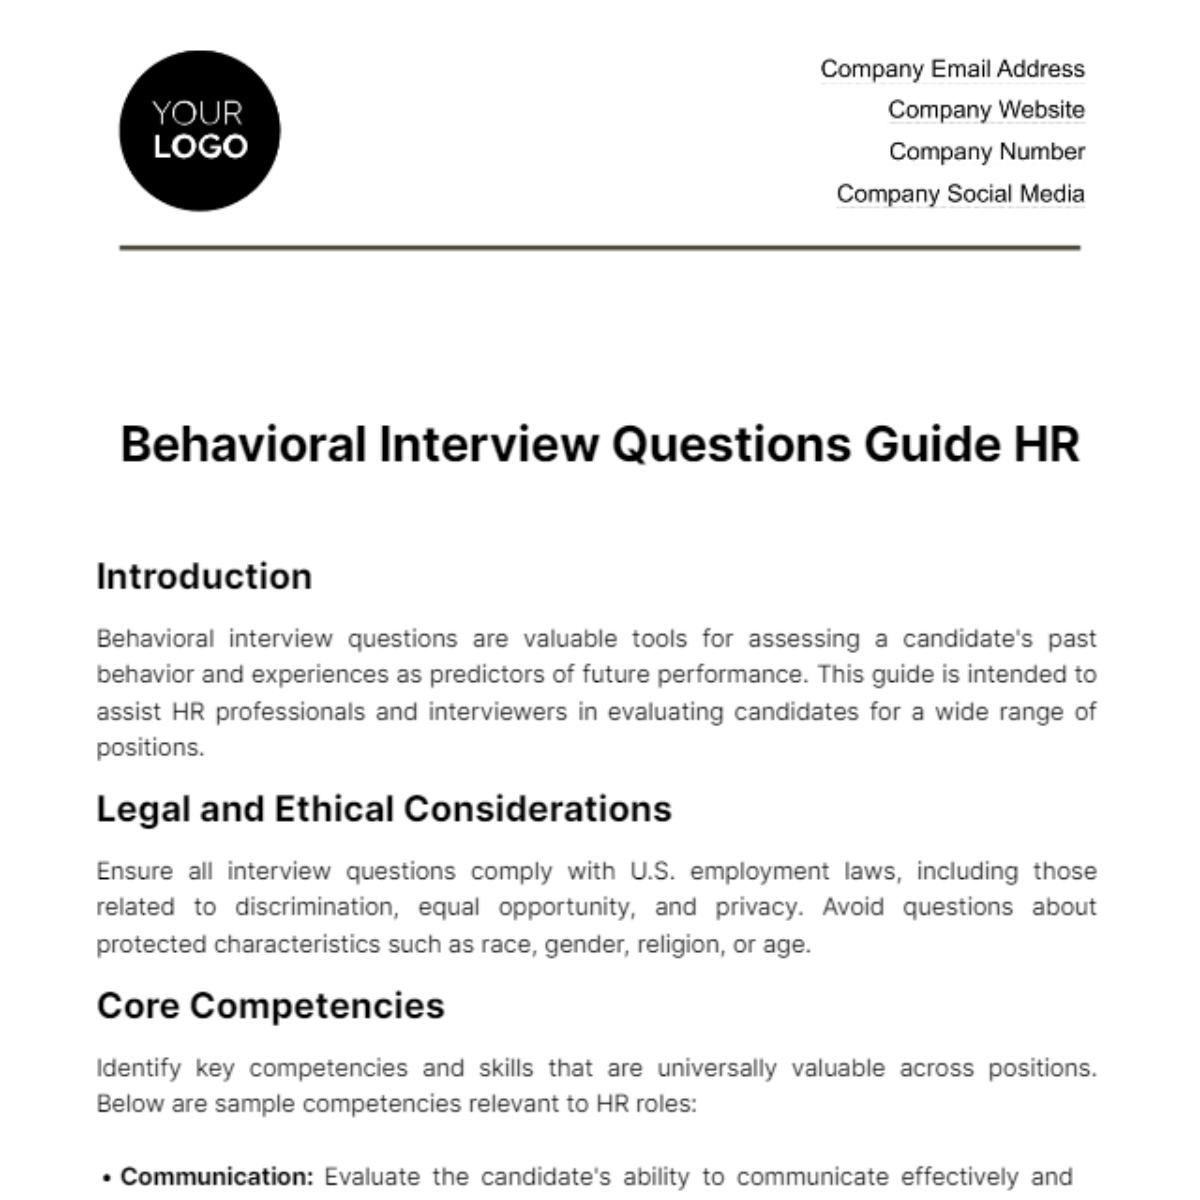 Behavioral Interview Questions Guide HR Template